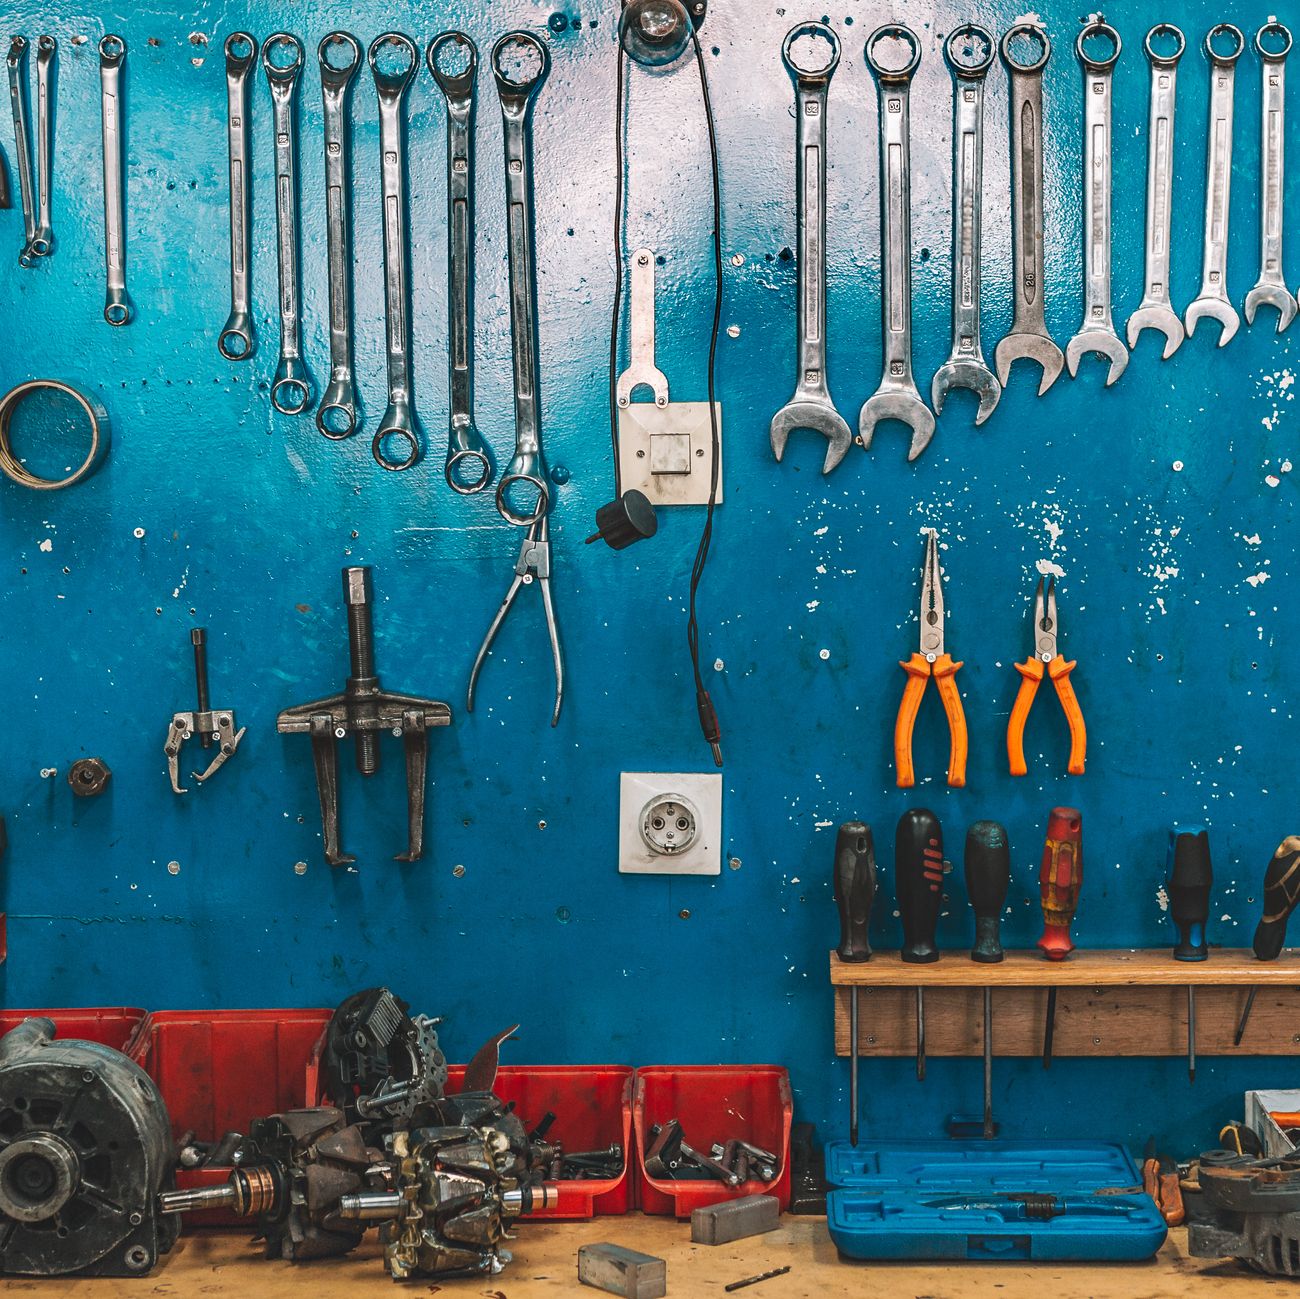 With the Right Car Tools, You Can Skip the Auto Shop and Start Doing Your Own Car Maintenance